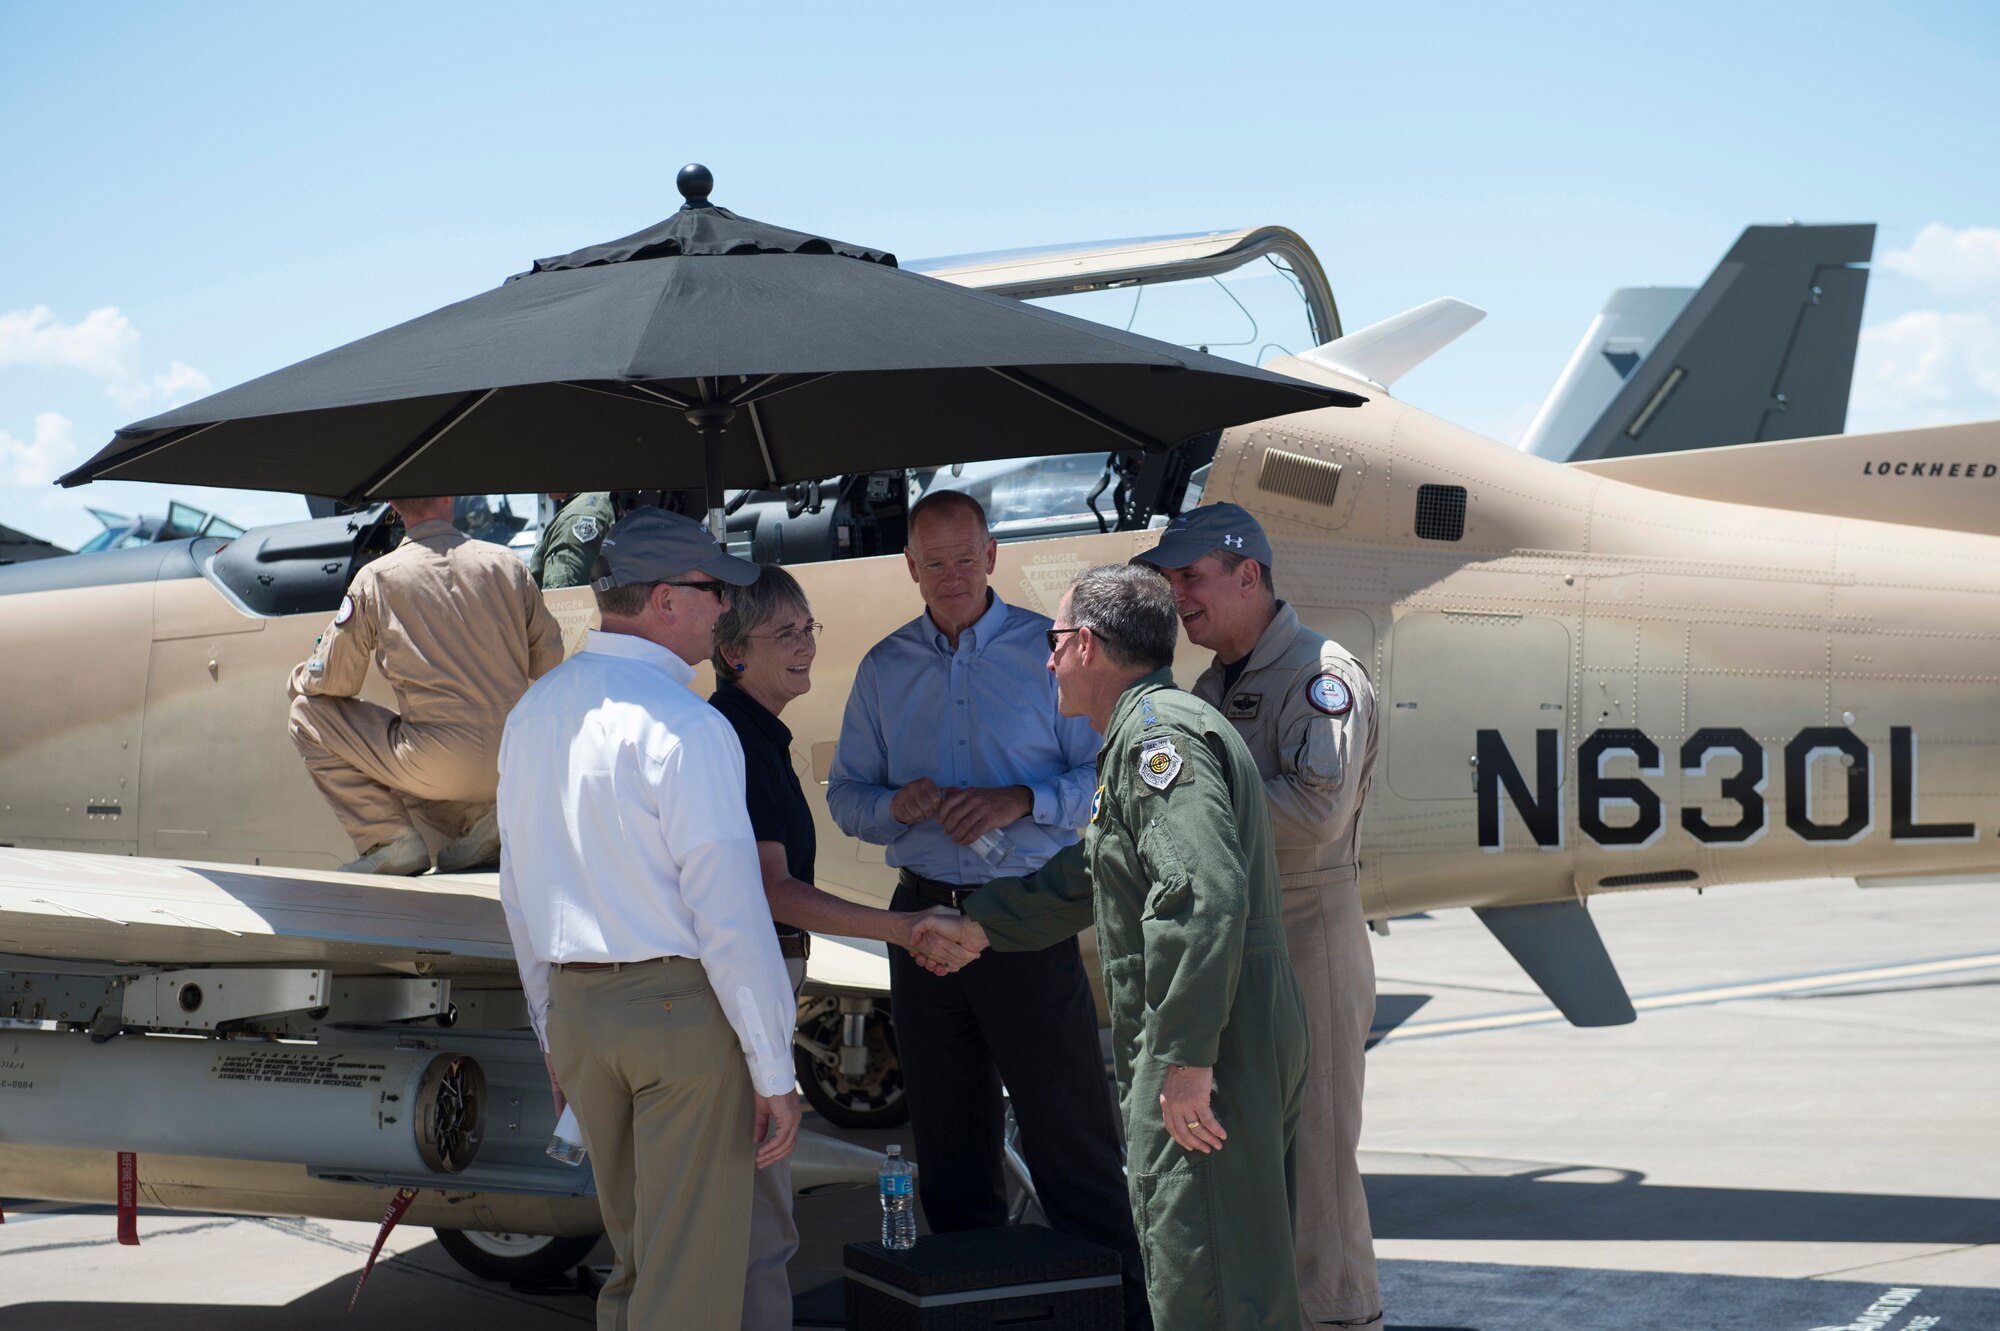 Secretary of the Air Force Heather Wilson meets with members from the Light Attack Experiment at Holloman Air Force Base, N.M., Aug. 9, 2017. Wilson had an immersion tour of Holloman and is here for a live-fly experiment with off-the-shelf aircraft. The Air Force is pursuing a Light Attack Capabilities Experimentation Campaign, which has grown out of our Close Air Support Experimentation Campaign. The Campaign is being led by the Air Force Strategic Development Planning and Experimentation Office under Air Force Materiel Command. (U.S. Air Force Airman 1st Class Alexis Docherty)